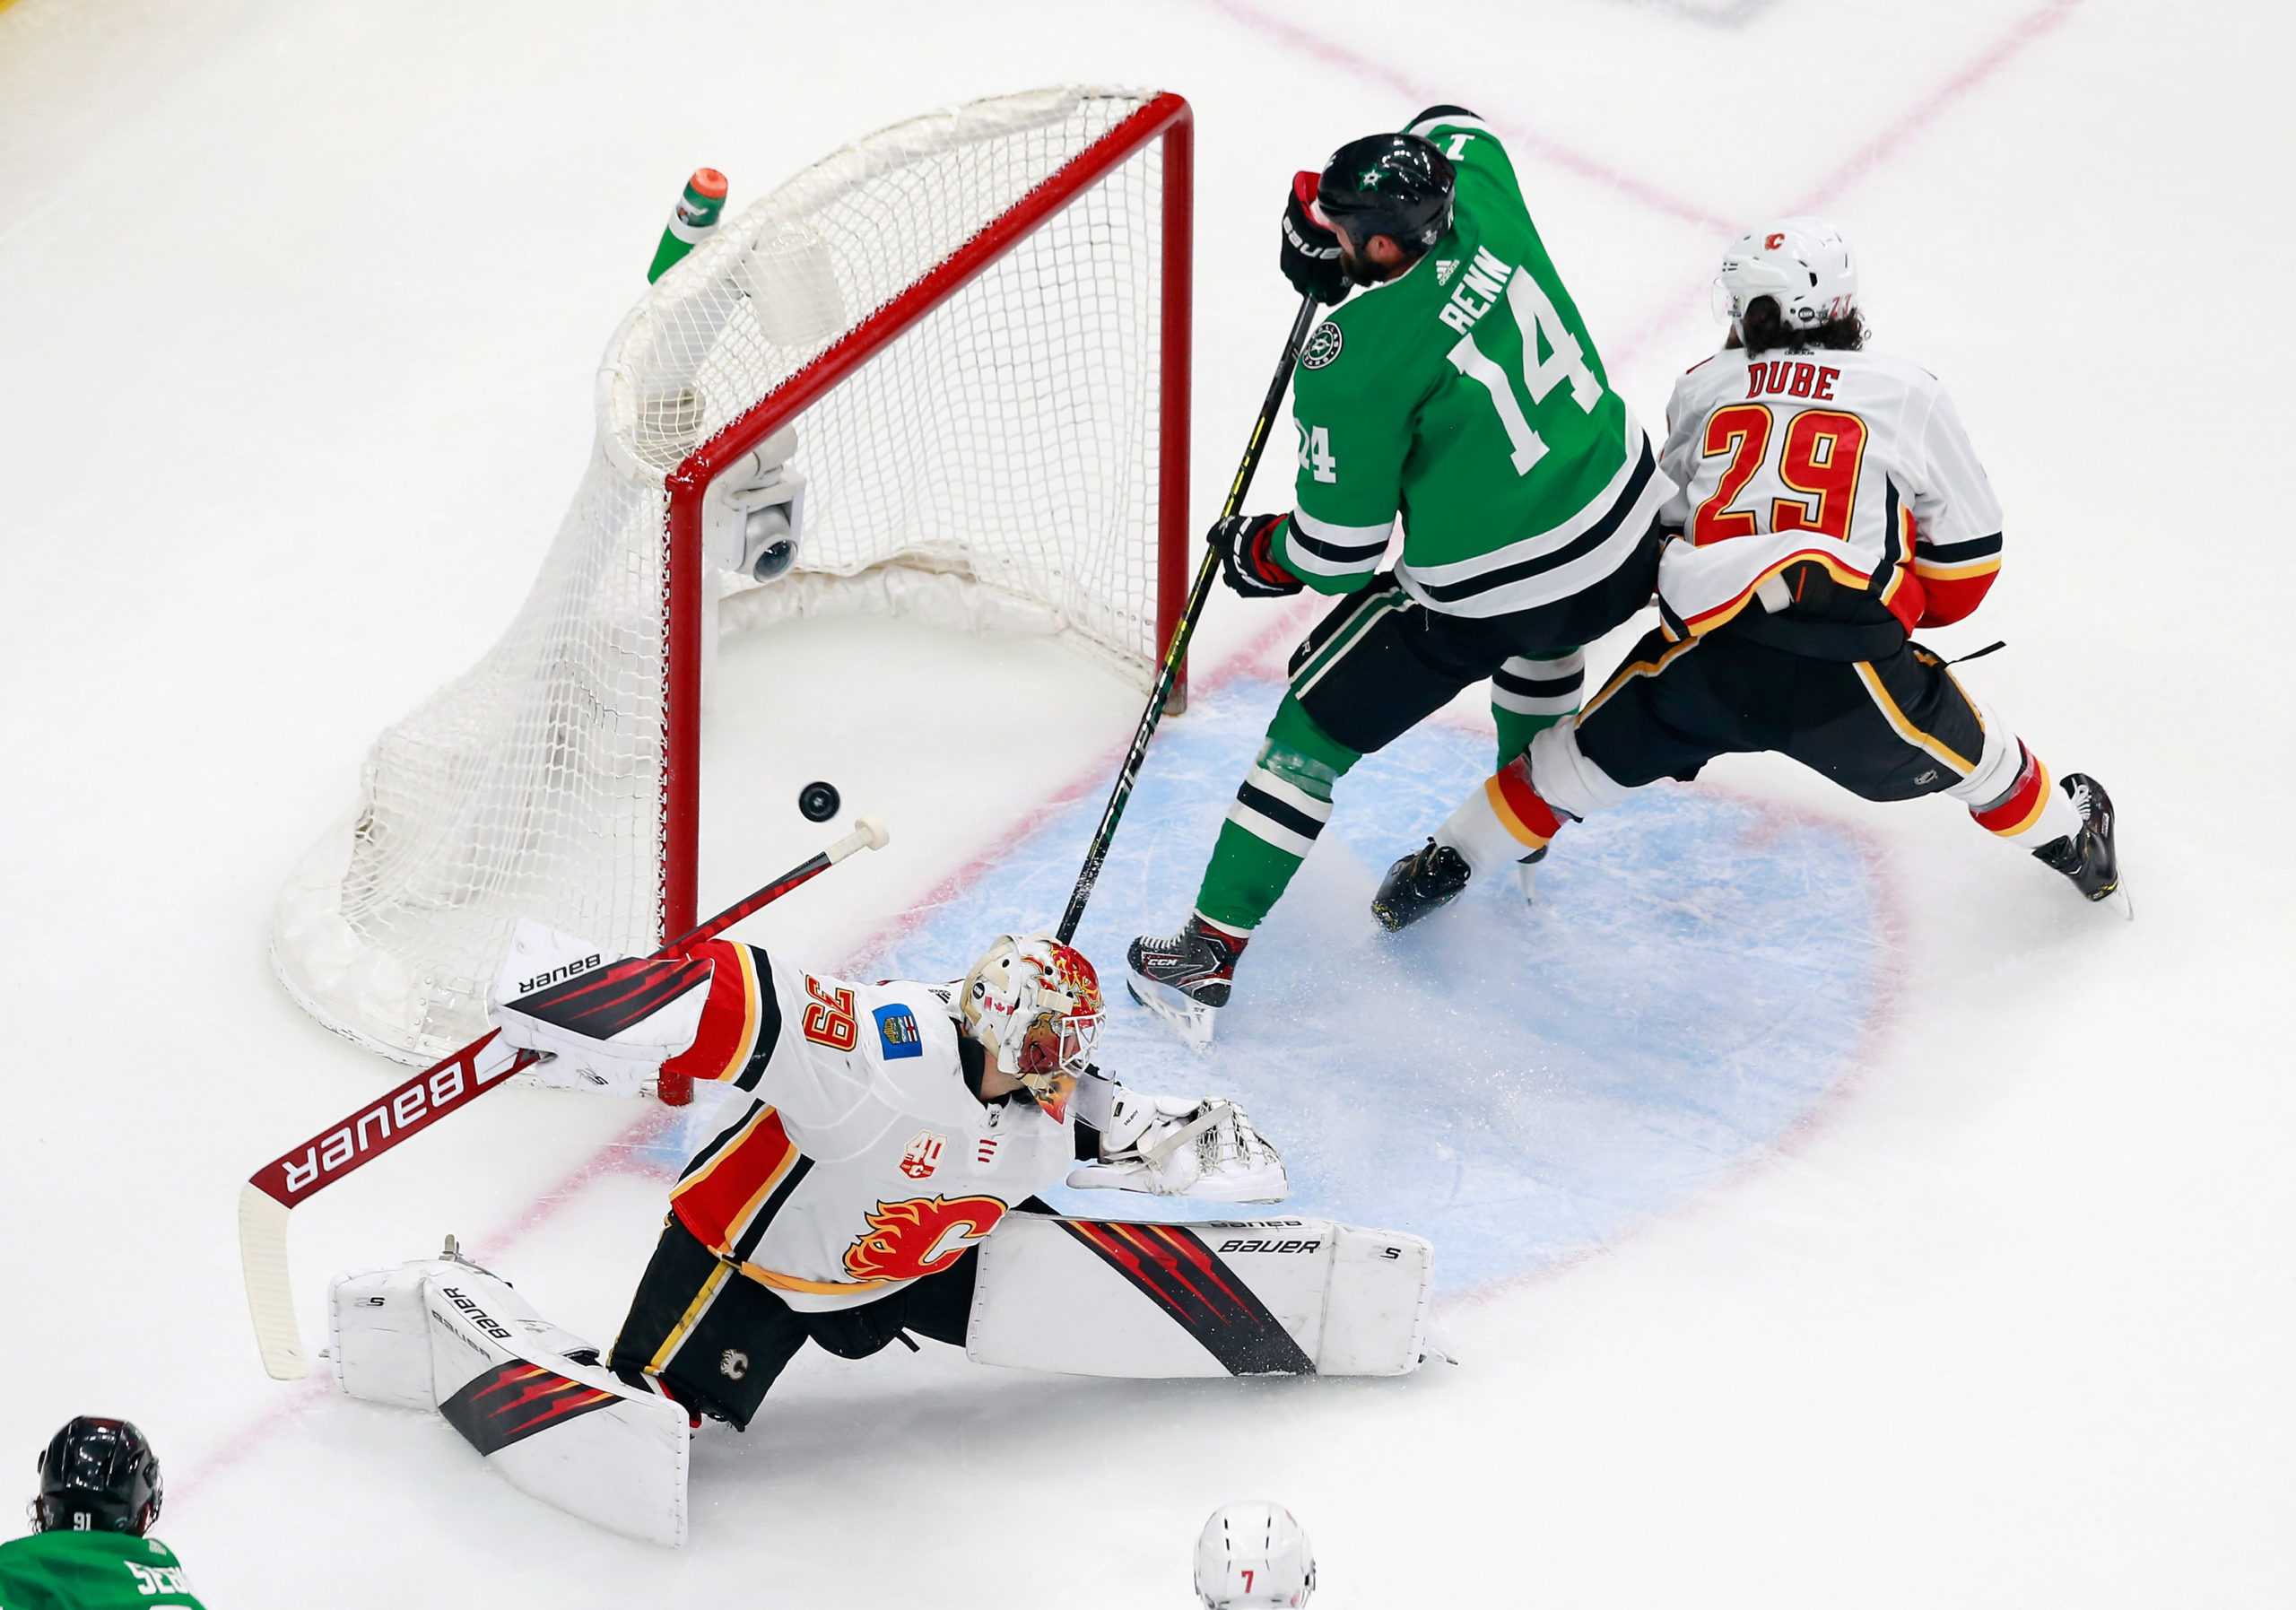 The Dallas Stars Jamie Benn (14) scores a short-handed goal in the first period against Calgary Flames goaltender Cam Talbot (39) in Game 5 of the Western Conference First Round playoff series at Rogers Place in Edmonton, Canada, on Tuesday, Aug. 18, 2020. The Stars won, 2-1, for a 3-2 series lead. (Jeff Vinnick/Getty Images/TNS)